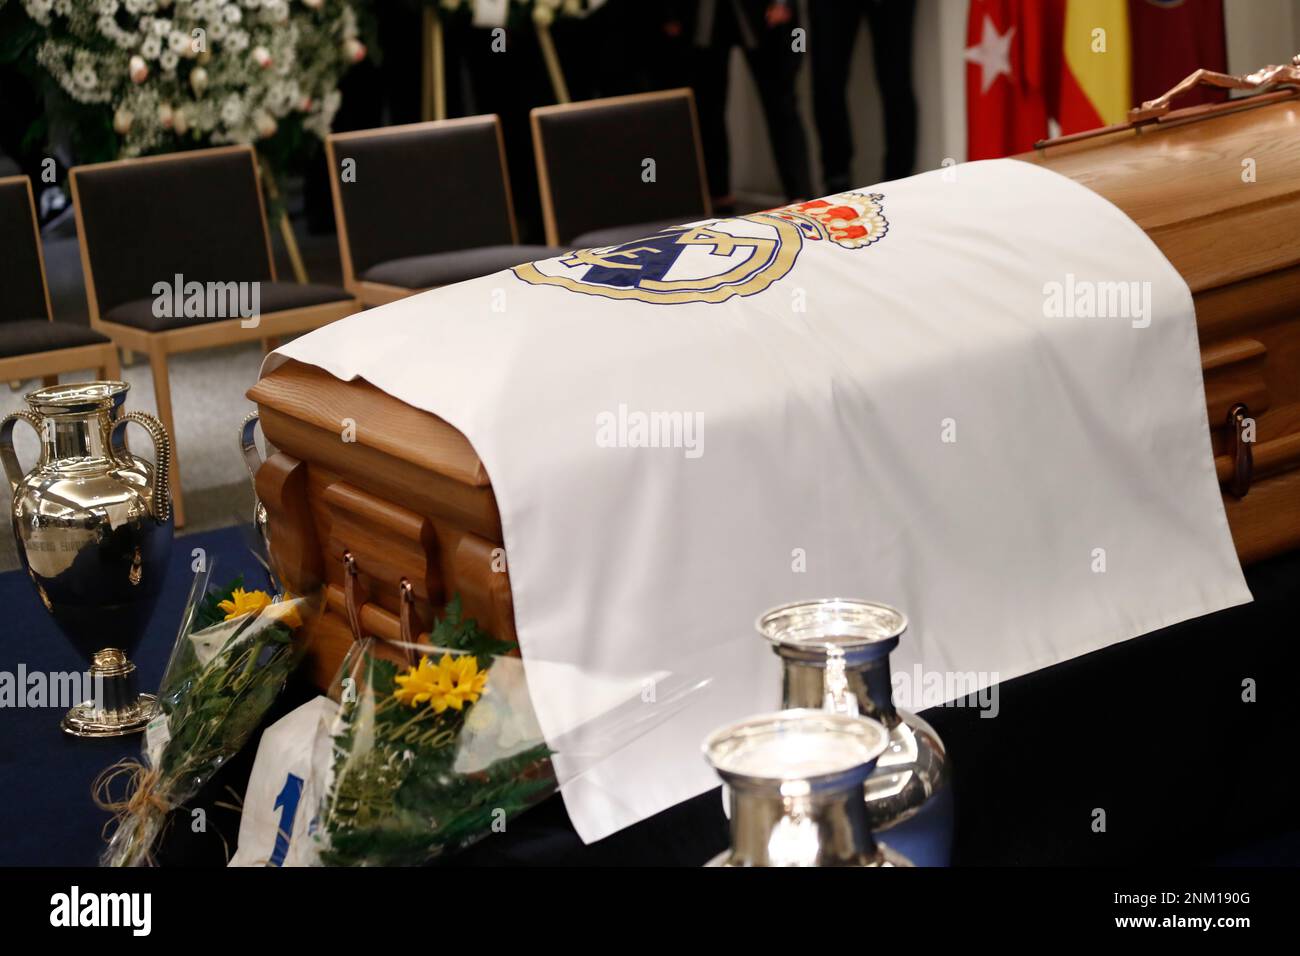 The mortal remains of Paco Gento will be laid to rest in the VIP box at the Santiago Bernabéu Stadium on January 18, 2022, in Madrid (Spain)